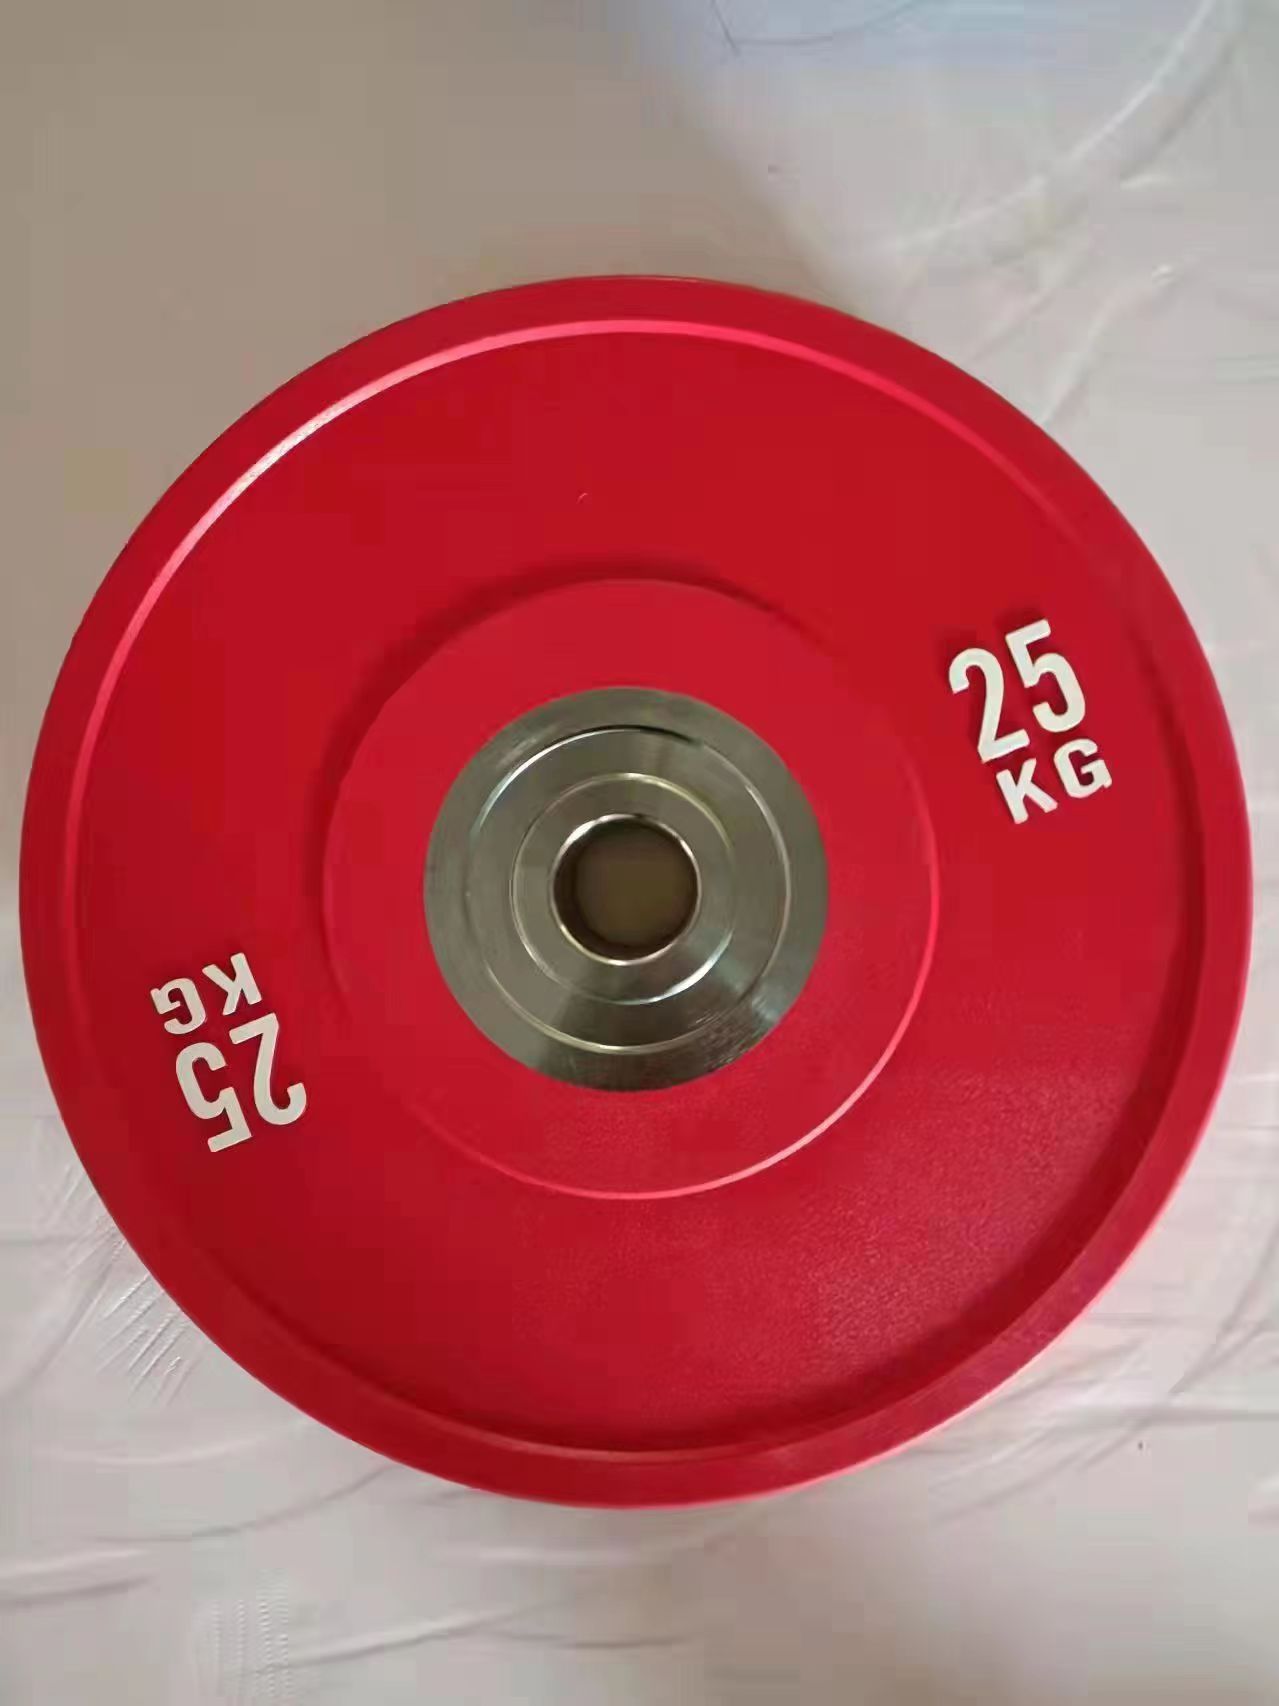 weightlifting steel lbs kgs competition bumper plate